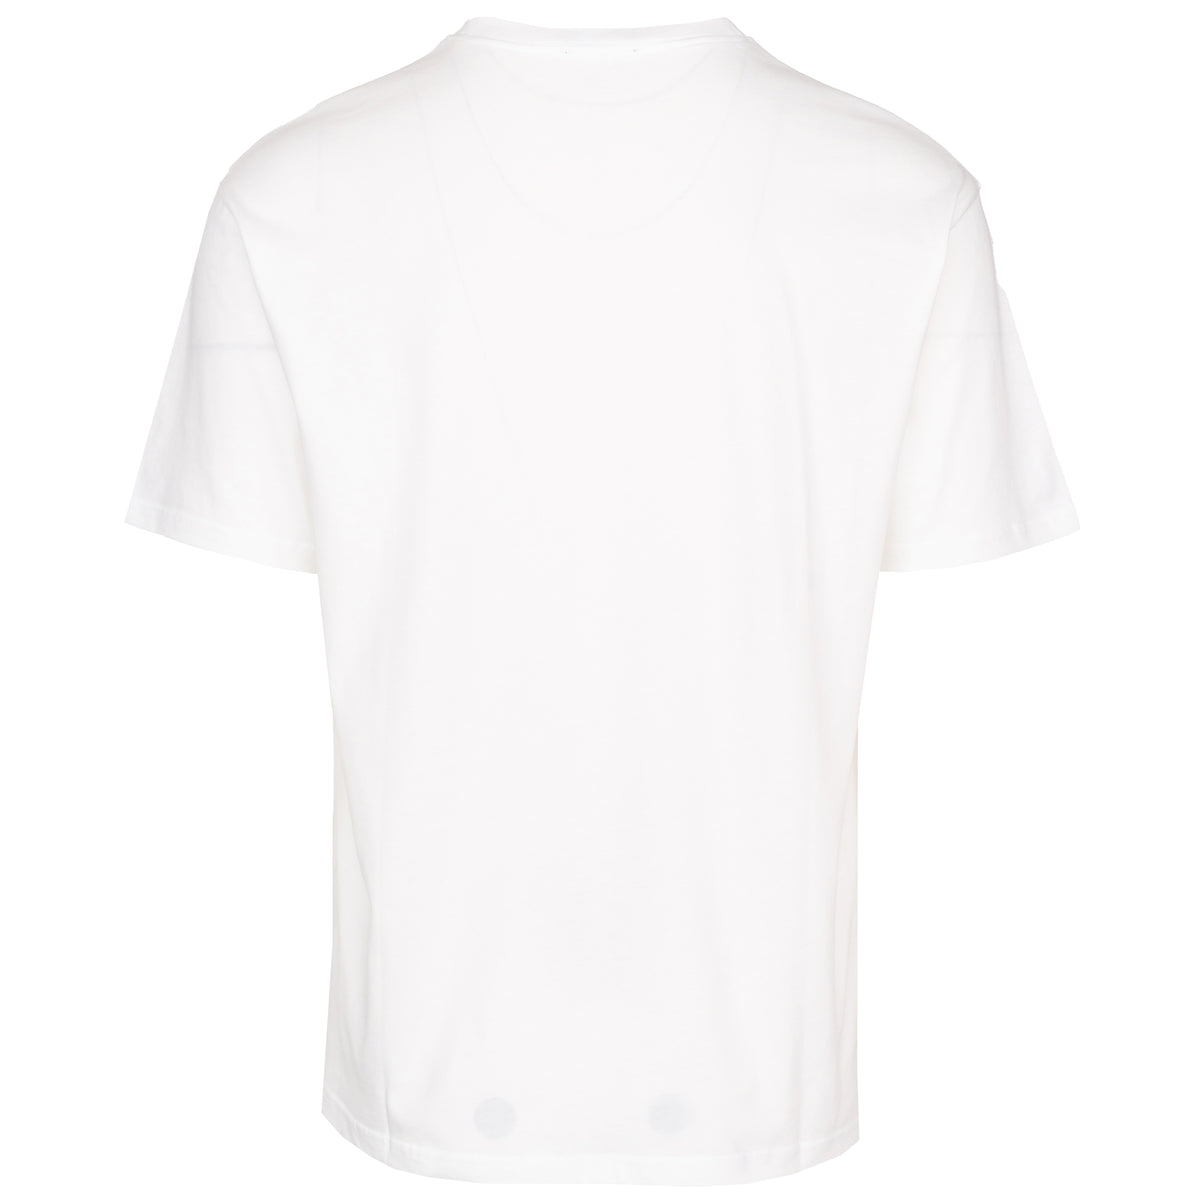 Load image into Gallery viewer, A.P.C. White-Black James APC Tee
